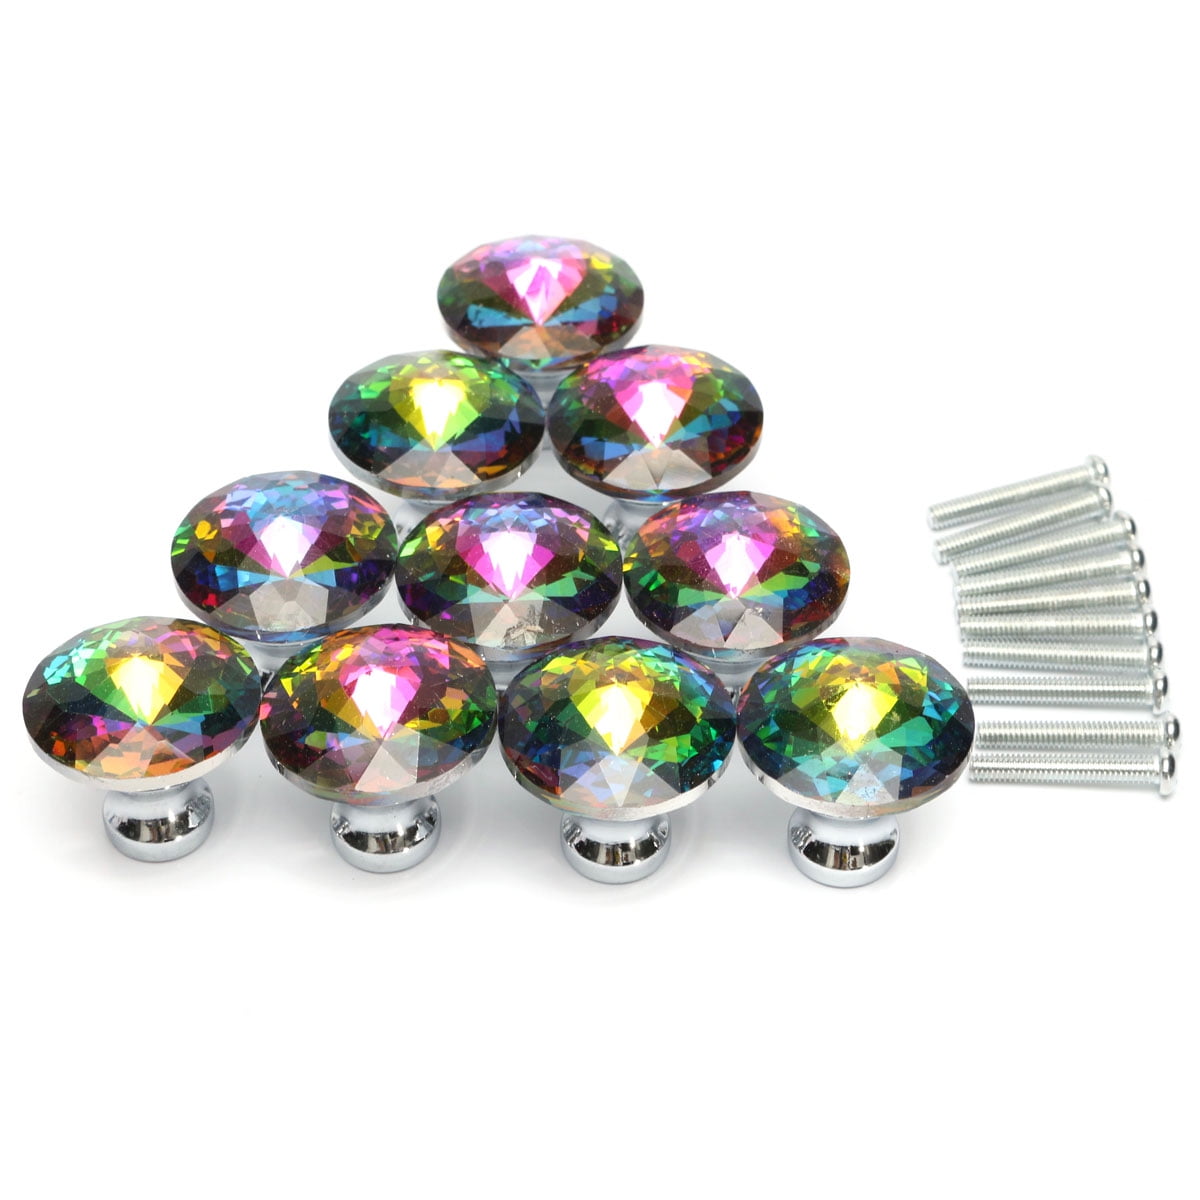 Set of 10 Sparkling Rainbow Glass Home Cabinet Drawer Pull Handle Wardrobe Knobs 